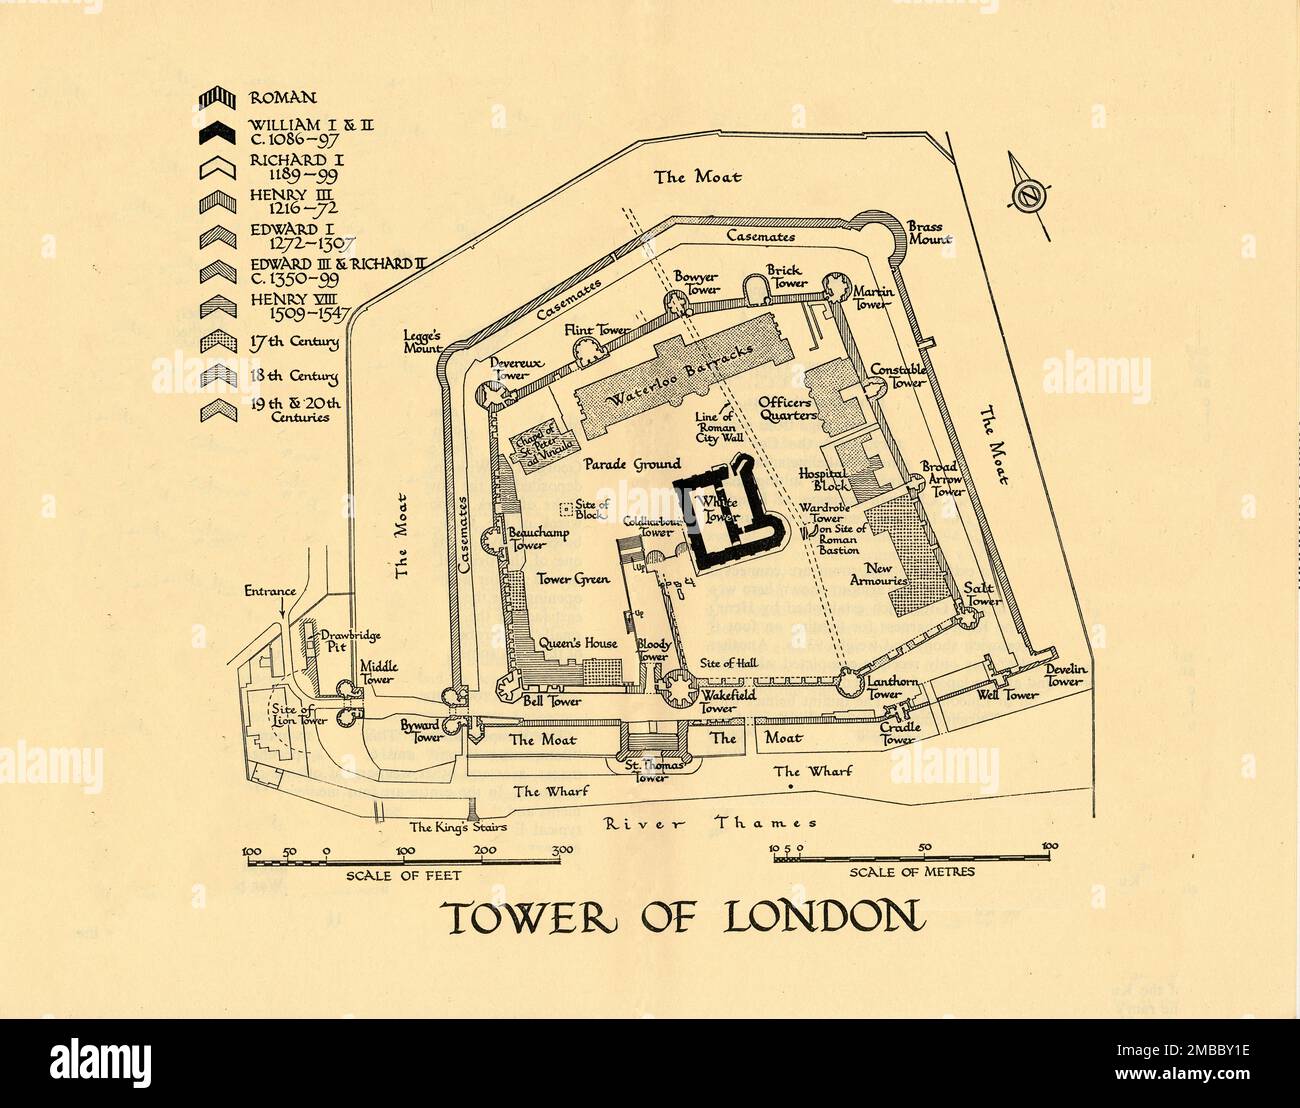 'Tower of London', 1961. Ground plan of the Tower of London, with key indicating building periods: 'Roman; William I &amp; II, c.1086-97; Richard I, 1189-99; Henry III, 1216-72; Edward I, 1272-1307; Edward III &amp; Richard II, c1350-99; Henry VIII, 1509-1547; 17th century; 18th century; 19th &amp; 20th centuries'. The River Thames is at the bottom. Features illustrated include the Wharf, King's Stairs, the Moat, parade ground, 'site of block' (for beheadings), Queen's House, Tower Green, Waterloo Barracks, Chapel of St Peter ad Vincula, New Armouries, Hospital Block, Officers Quarters, line o Stock Photo